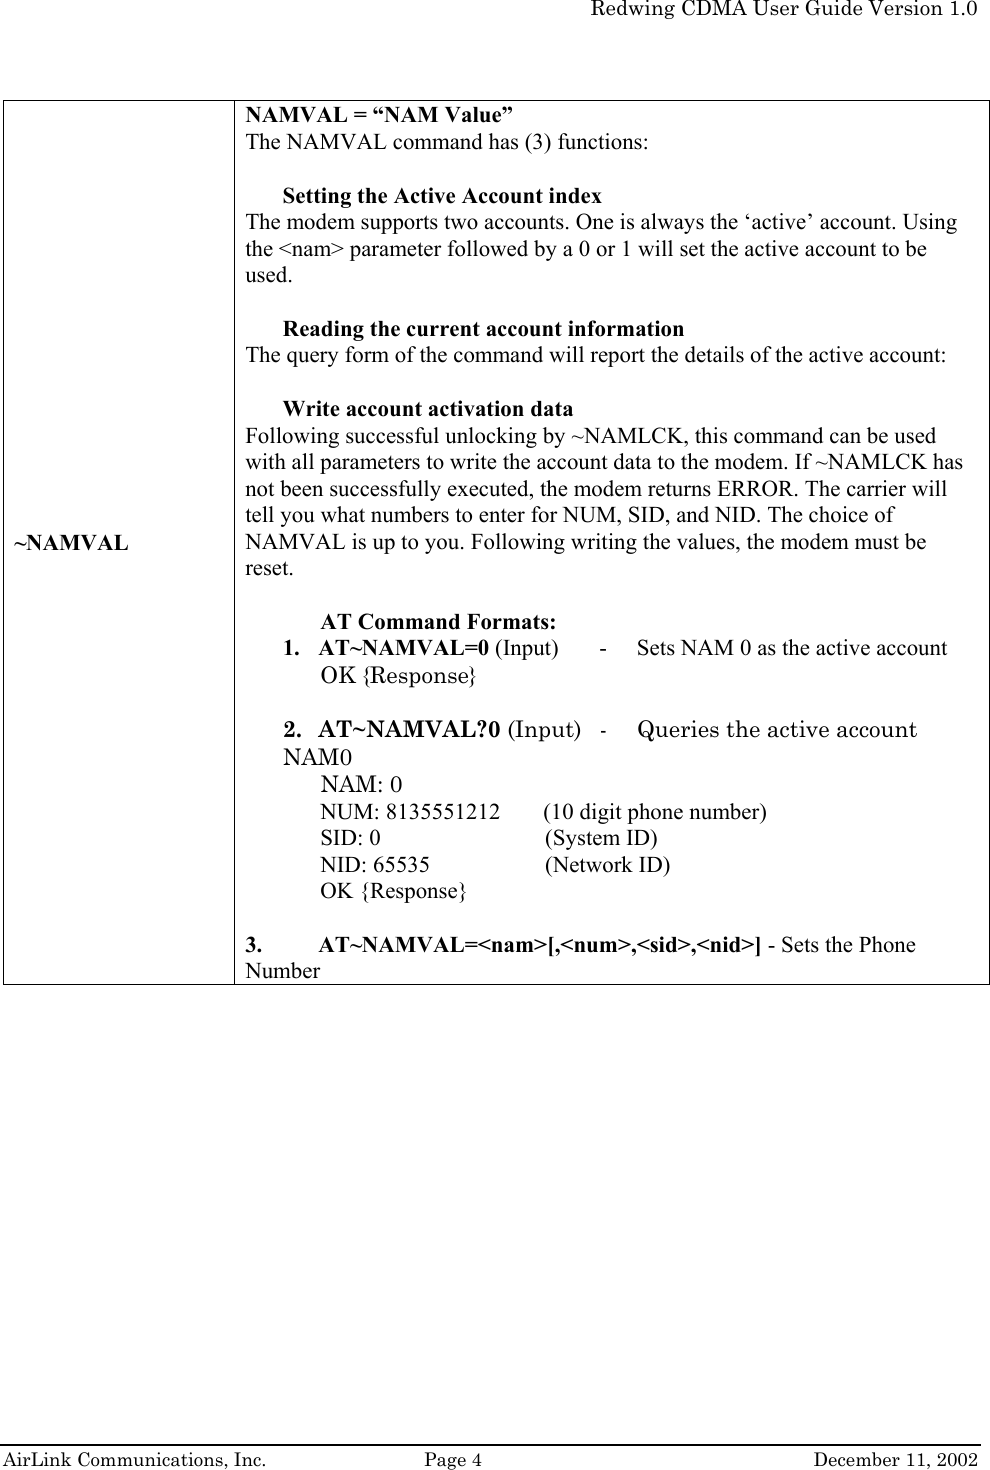   Redwing CDMA User Guide Version 1.0   AirLink Communications, Inc.  Page 4  December 11, 2002 ~NAMVAL NAMVAL = “NAM Value”  The NAMVAL command has (3) functions:   Setting the Active Account index  The modem supports two accounts. One is always the ‘active’ account. Using the &lt;nam&gt; parameter followed by a 0 or 1 will set the active account to be used.  Reading the current account information  The query form of the command will report the details of the active account:  Write account activation data  Following successful unlocking by ~NAMLCK, this command can be used with all parameters to write the account data to the modem. If ~NAMLCK has not been successfully executed, the modem returns ERROR. The carrier will tell you what numbers to enter for NUM, SID, and NID. The choice of NAMVAL is up to you. Following writing the values, the modem must be reset.  AT Command Formats:  1. AT~NAMVAL=0 (Input)  -   Sets NAM 0 as the active account  OK {Response}  2. AT~NAMVAL?0 (Input)  -  Queries the active account NAM0 NAM: 0 NUM: 8135551212    (10 digit phone number) SID: 0   (System ID) NID: 65535    (Network ID) OK {Response}  3. AT~NAMVAL=&lt;nam&gt;[,&lt;num&gt;,&lt;sid&gt;,&lt;nid&gt;] - Sets the Phone Number 